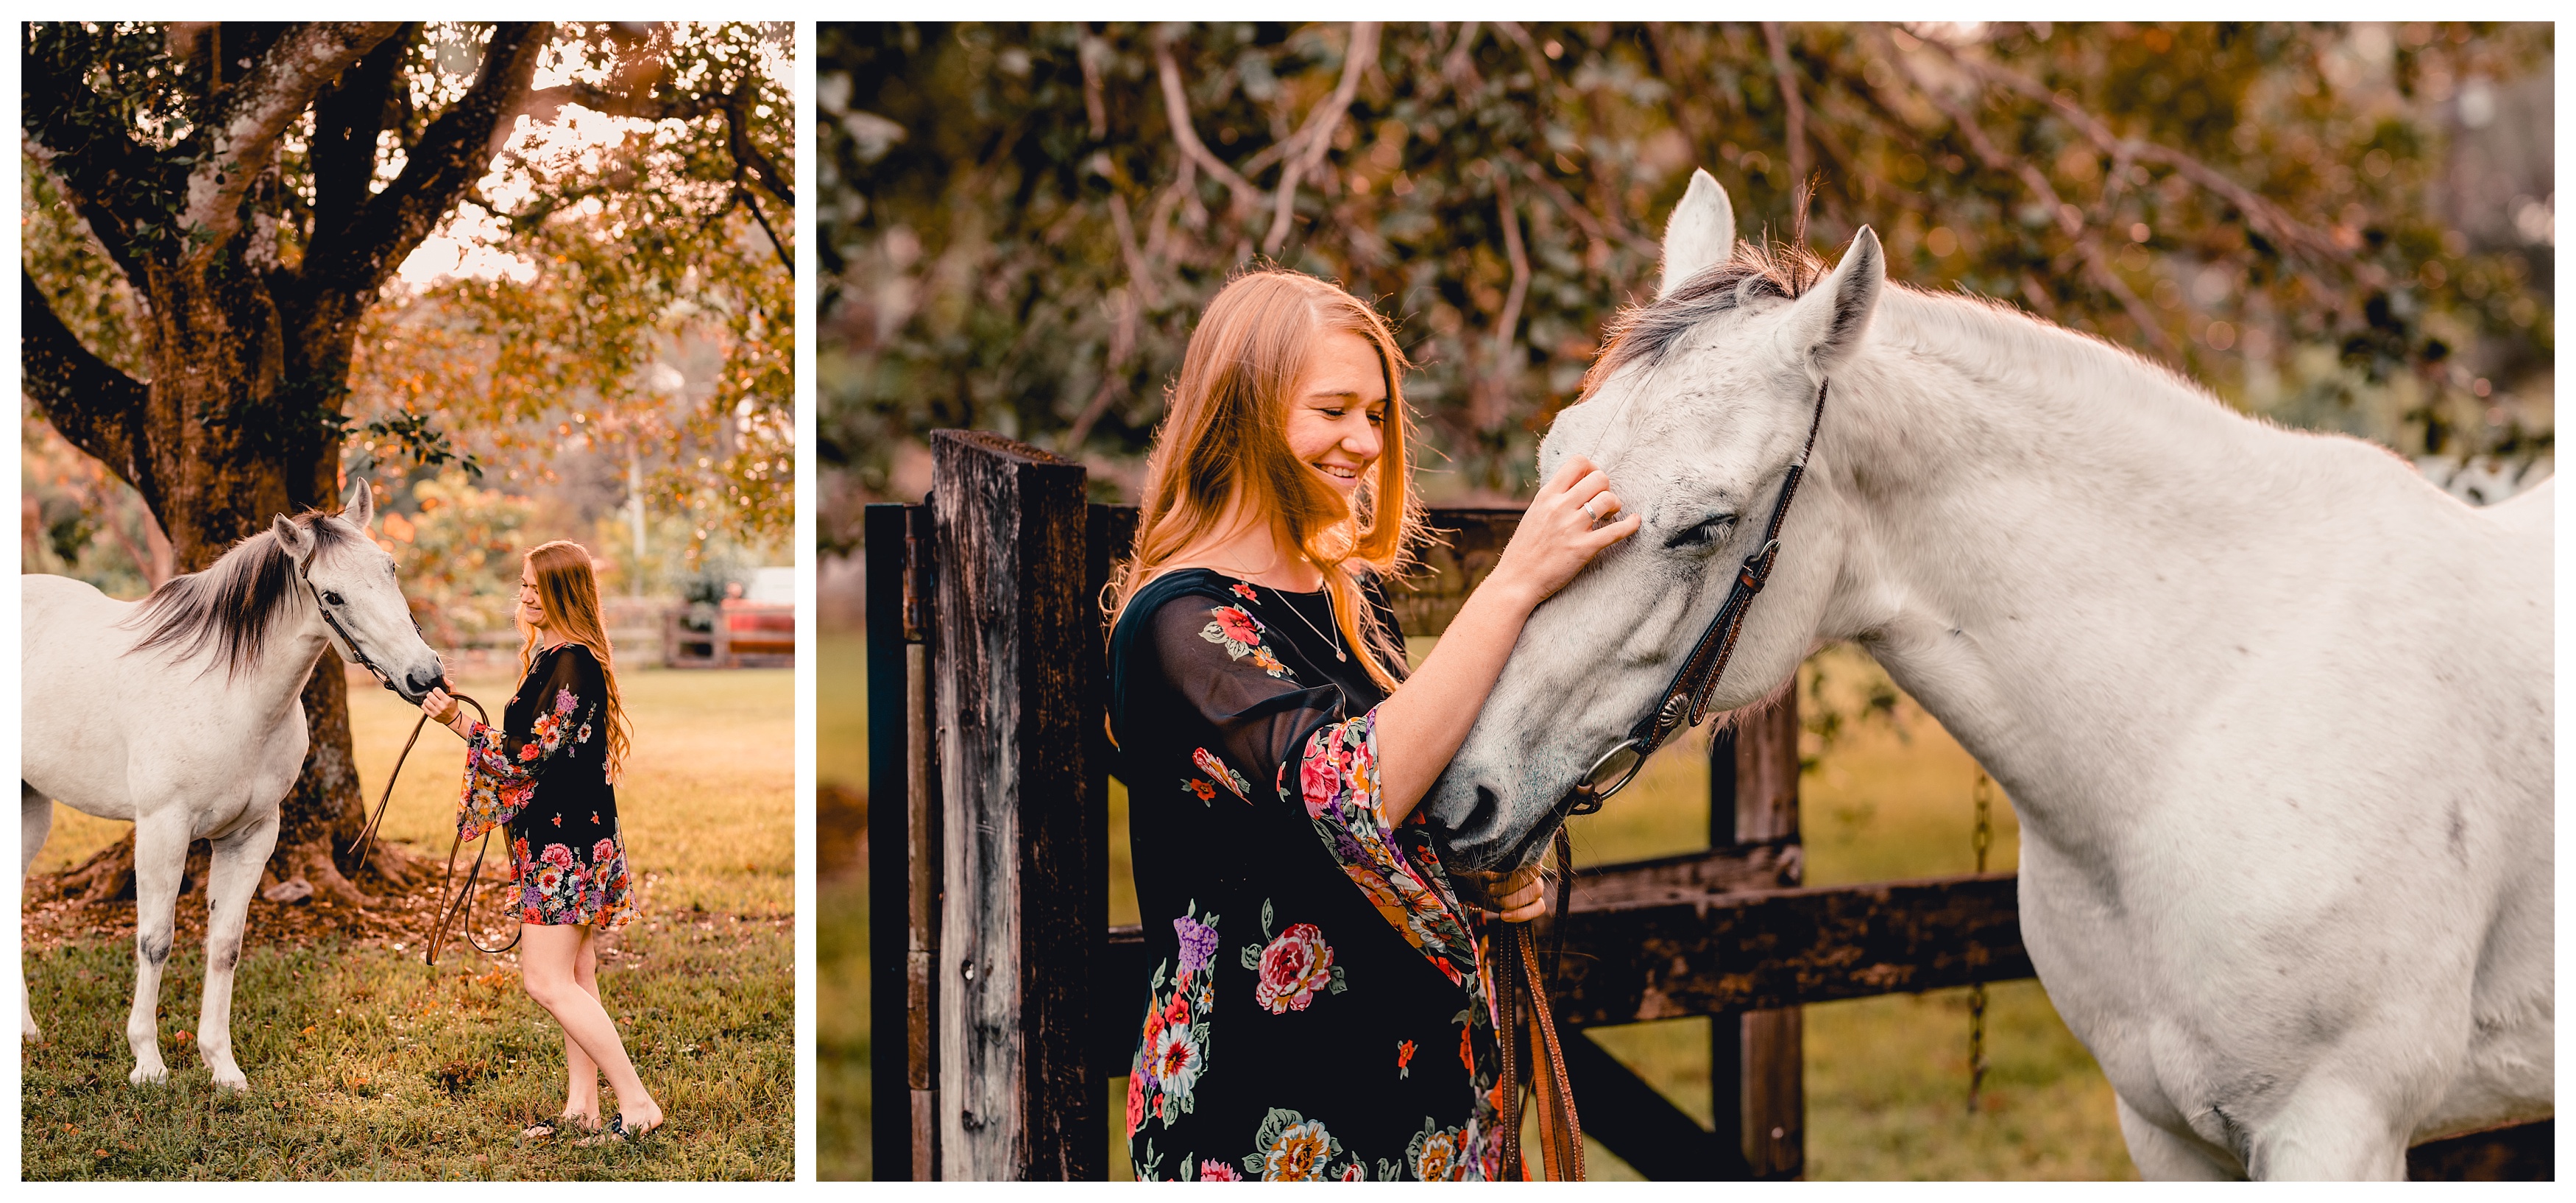 Pictures capturing the bond between horse and rider in Florida. Shelly Williams Photography